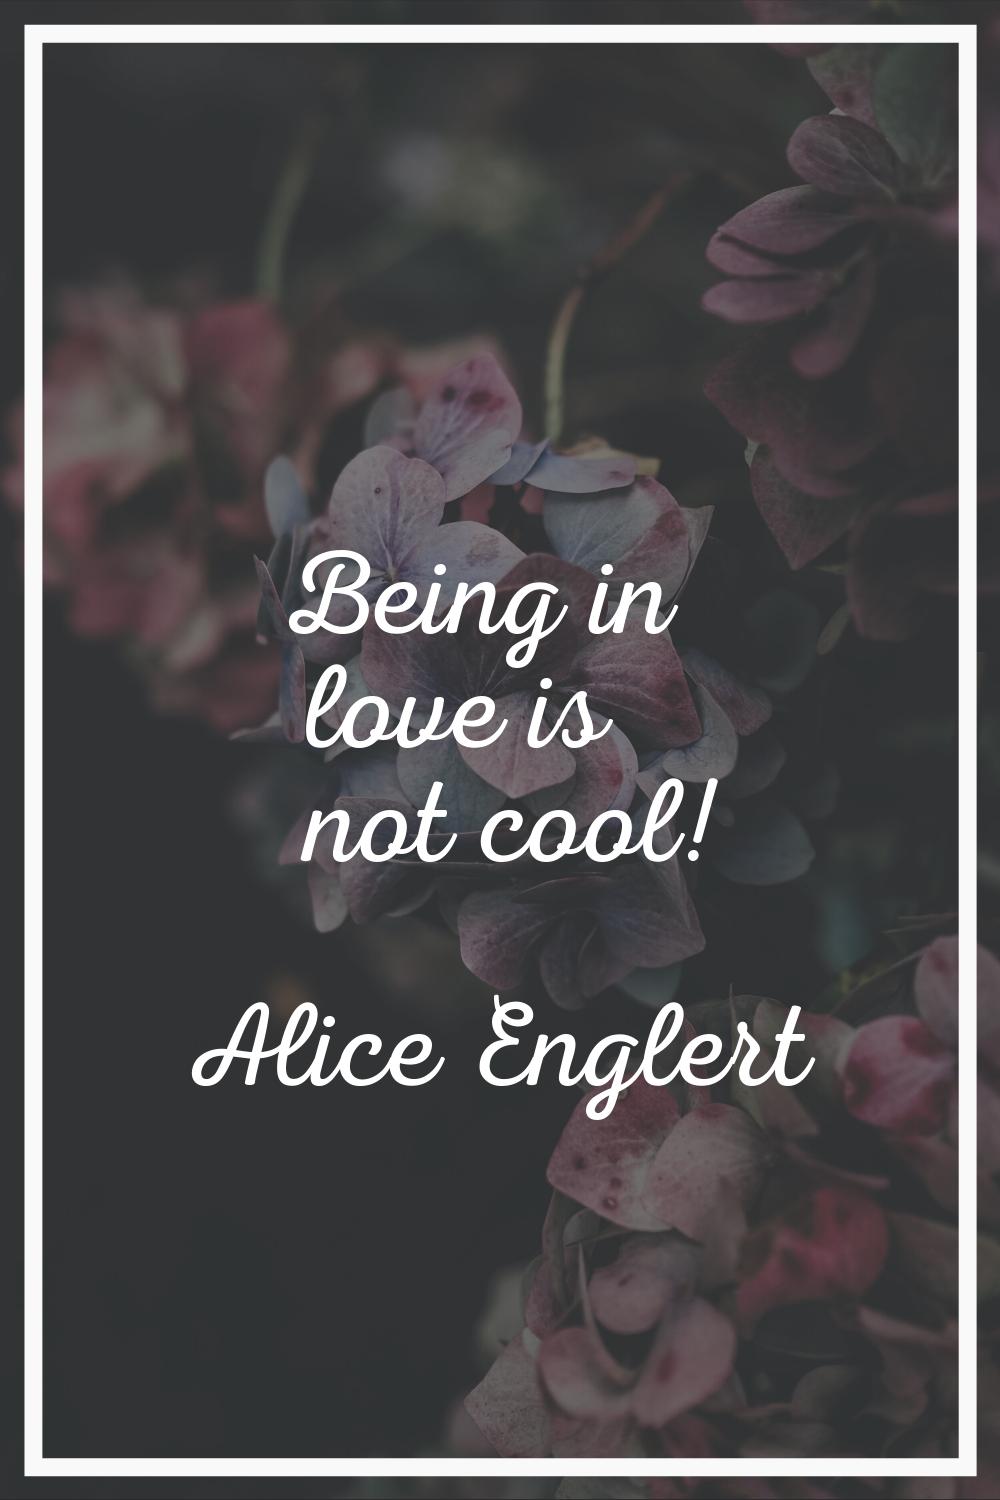 Being in love is not cool!